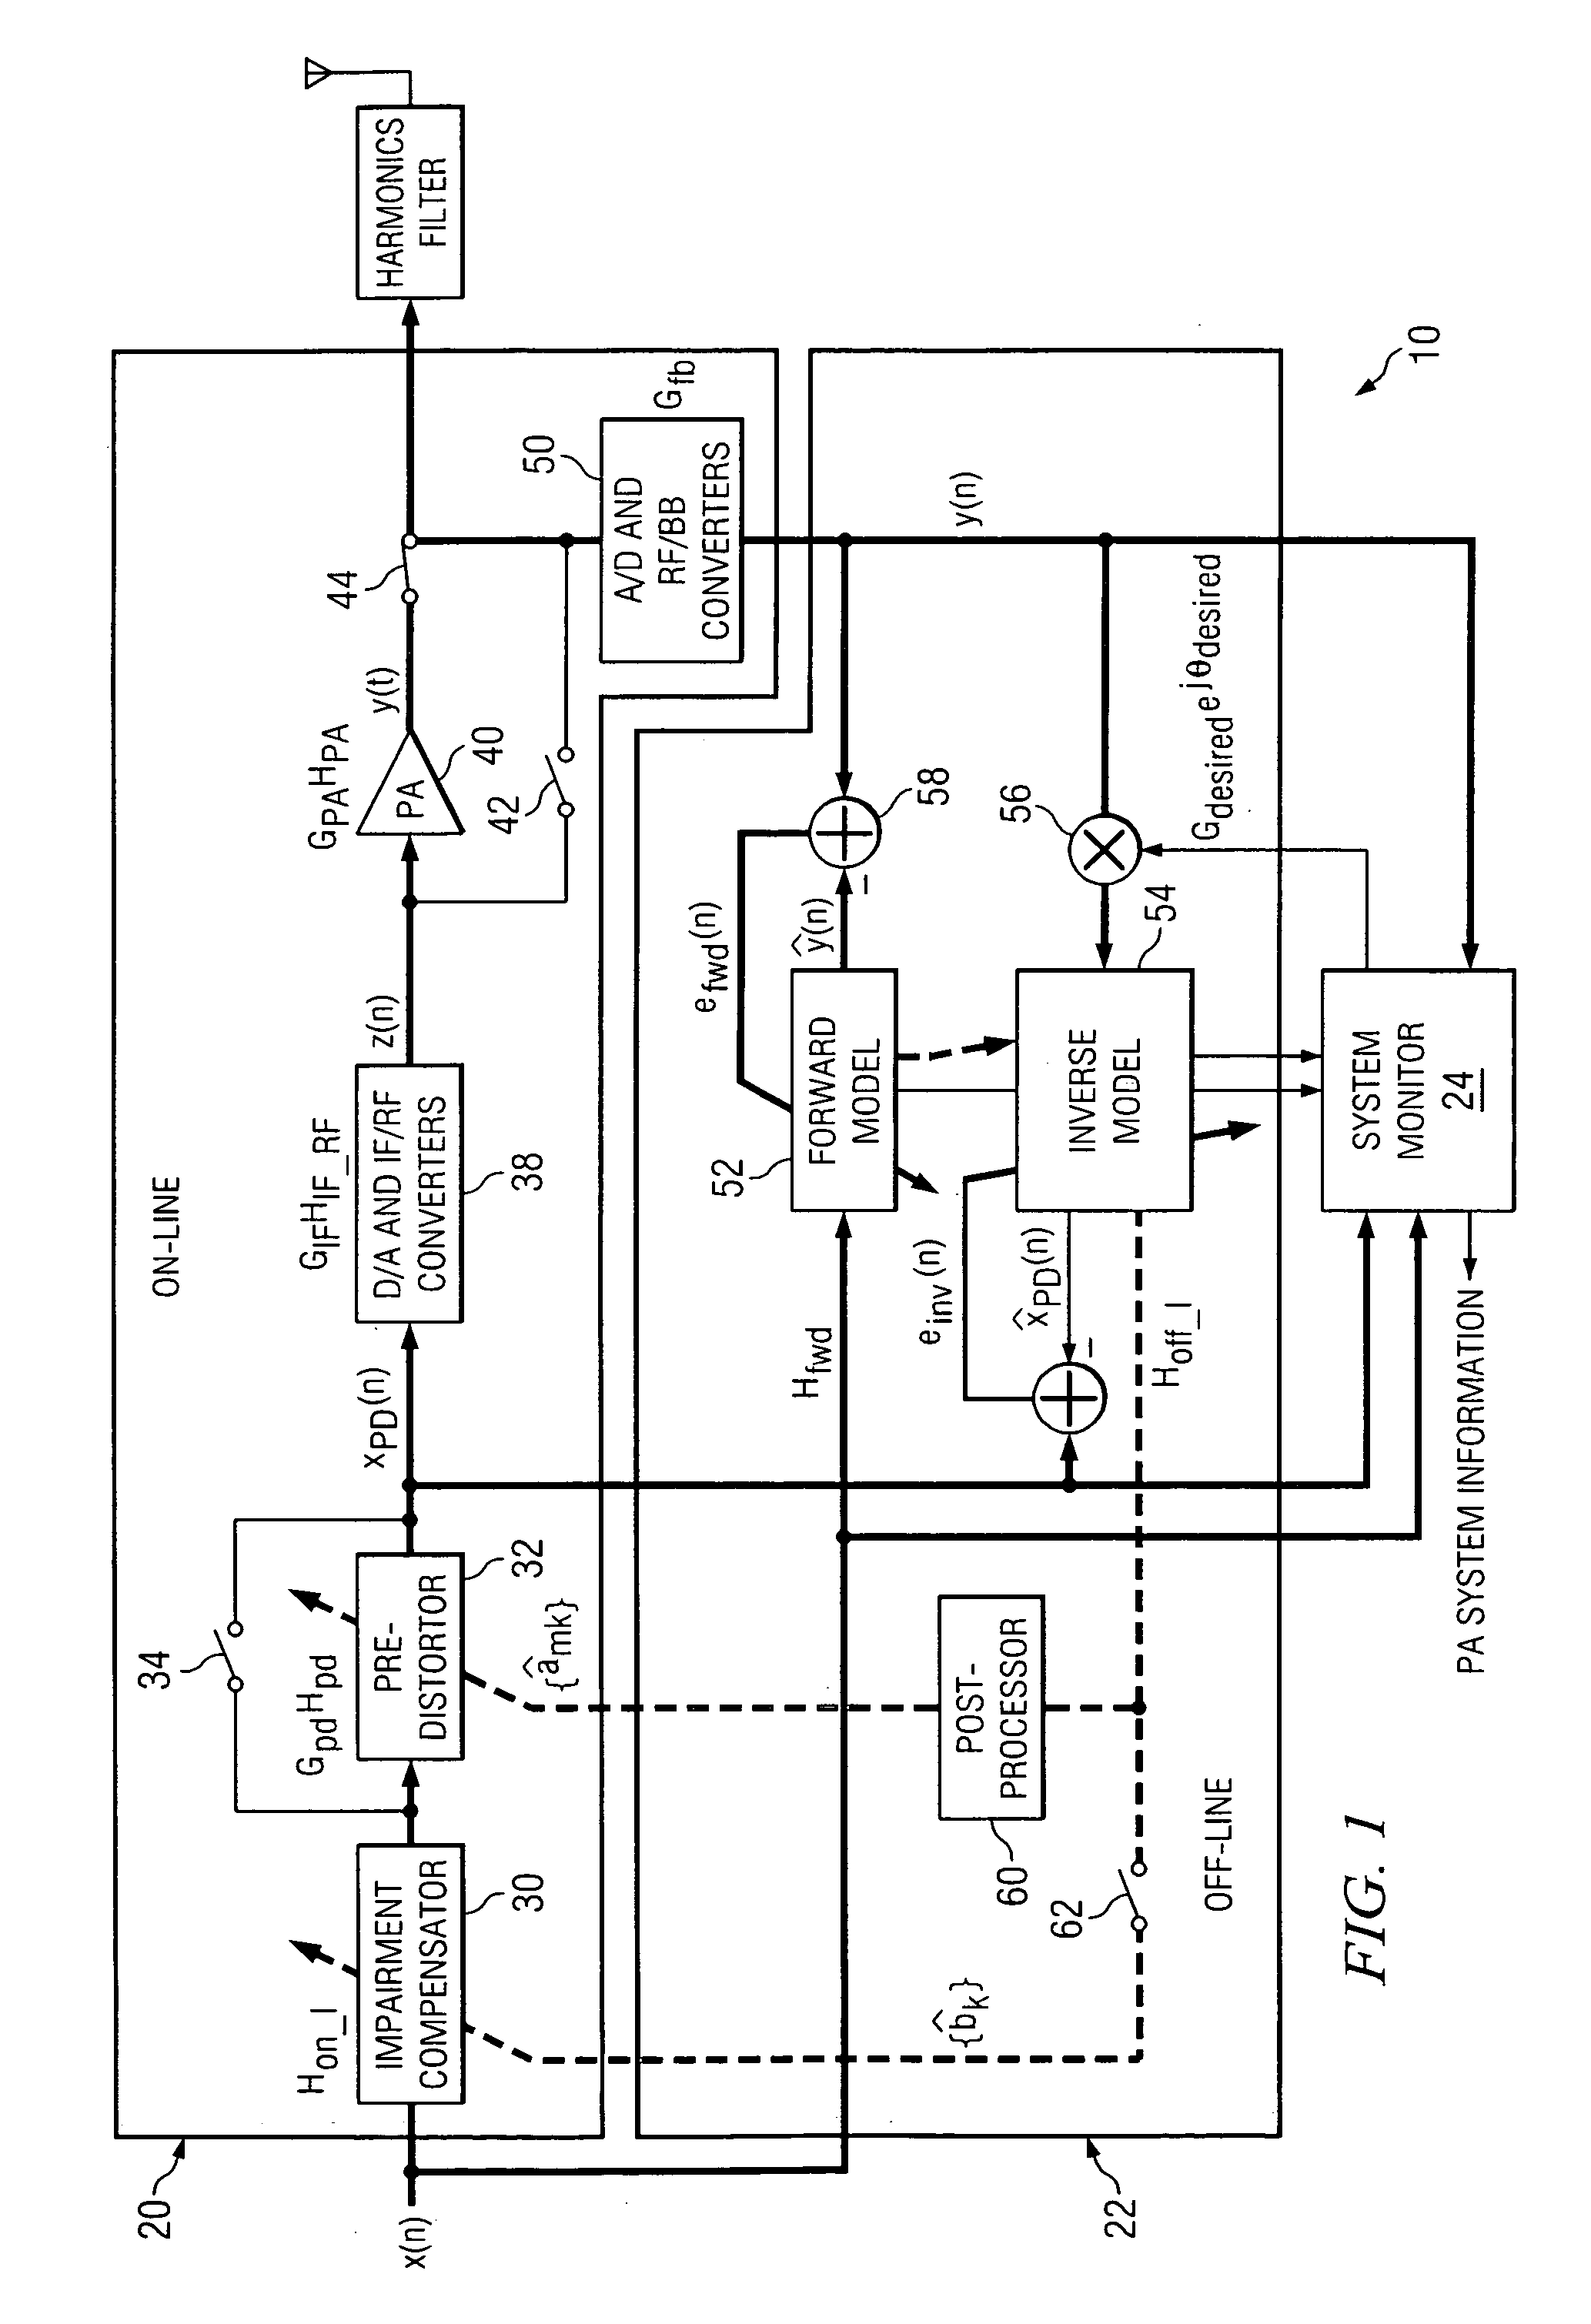 Performing remote power amplifier linearization